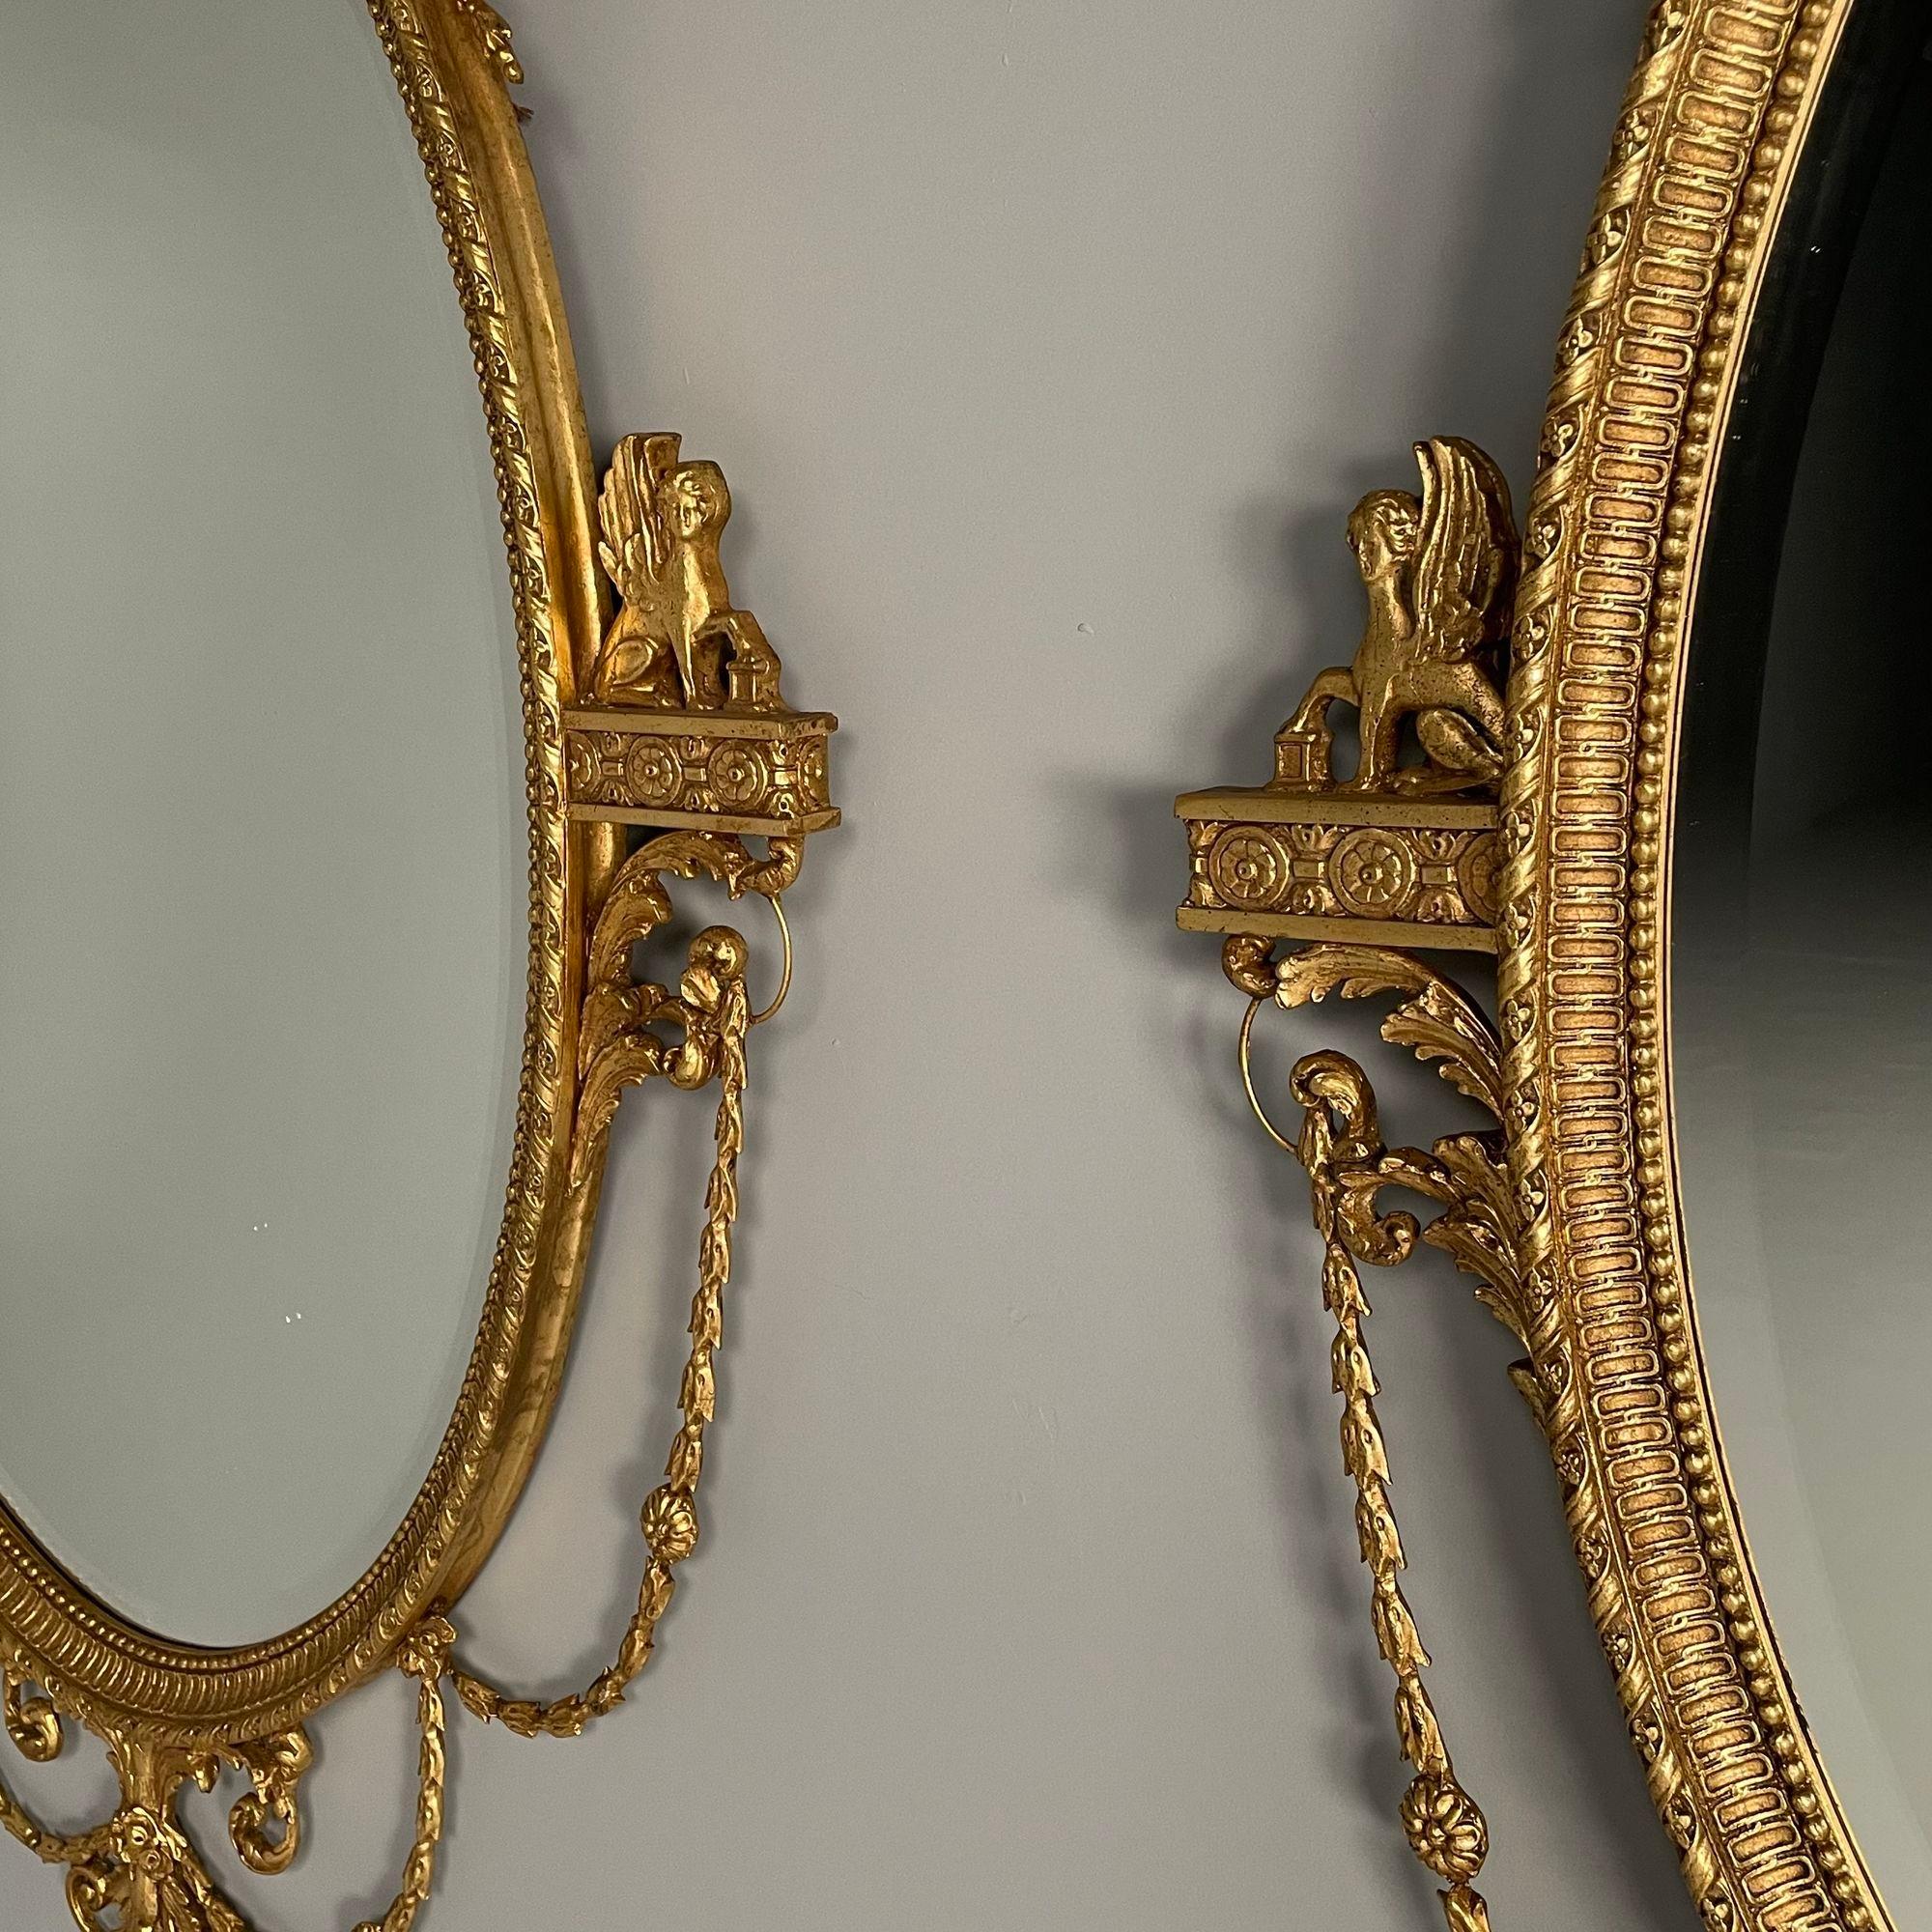 Friedman Brothers, English Regency Style, Oval Wall Mirrors, Giltwood, Gesso For Sale 6